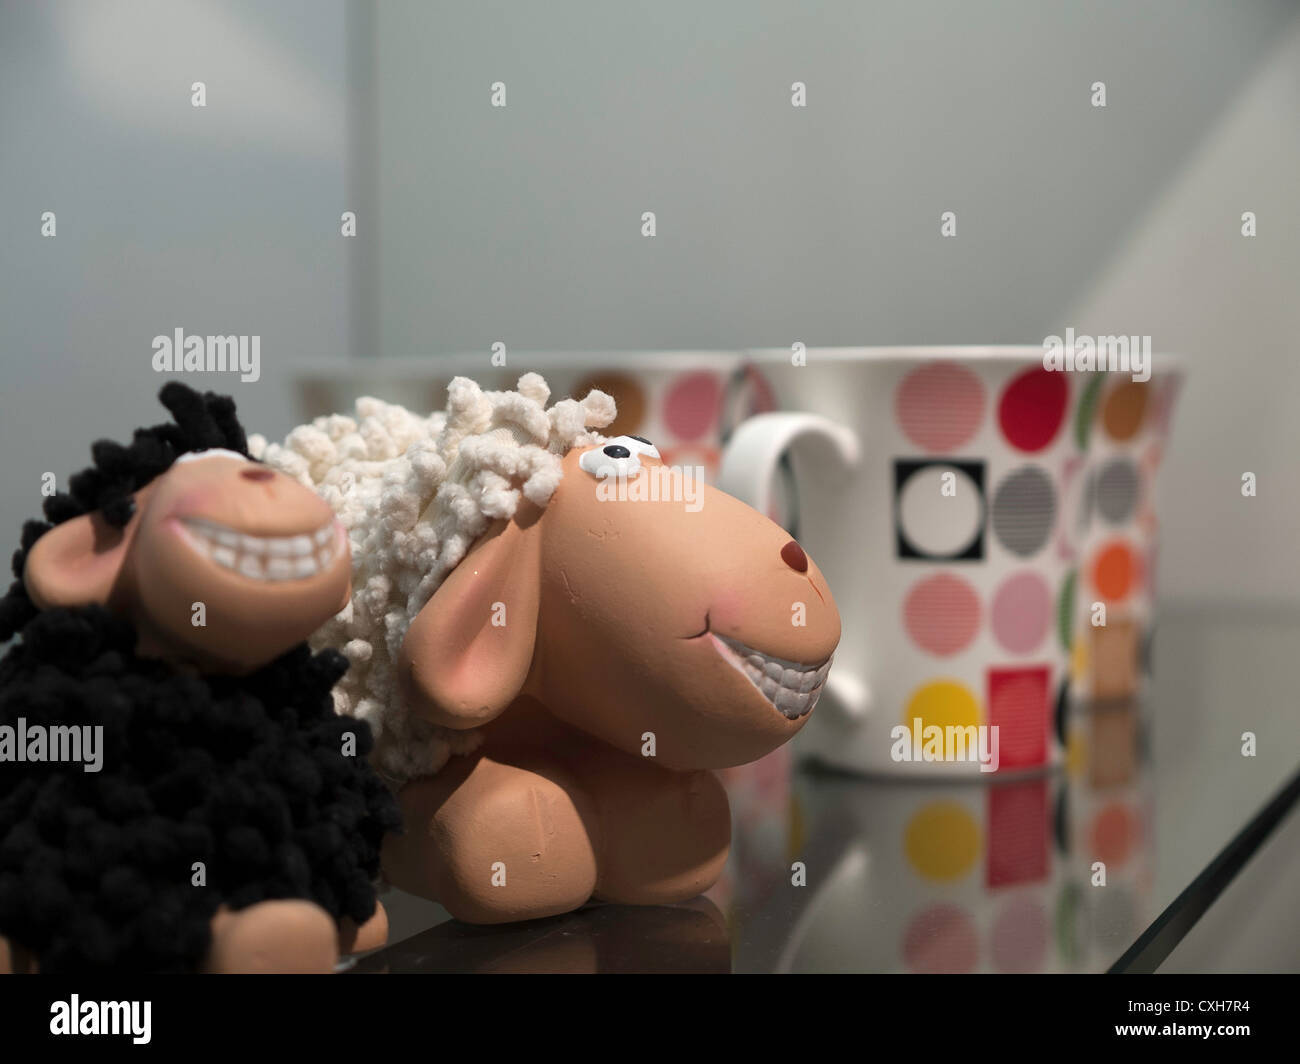 Shelf with porcelain colorful mugs and sheep toys Stock Photo